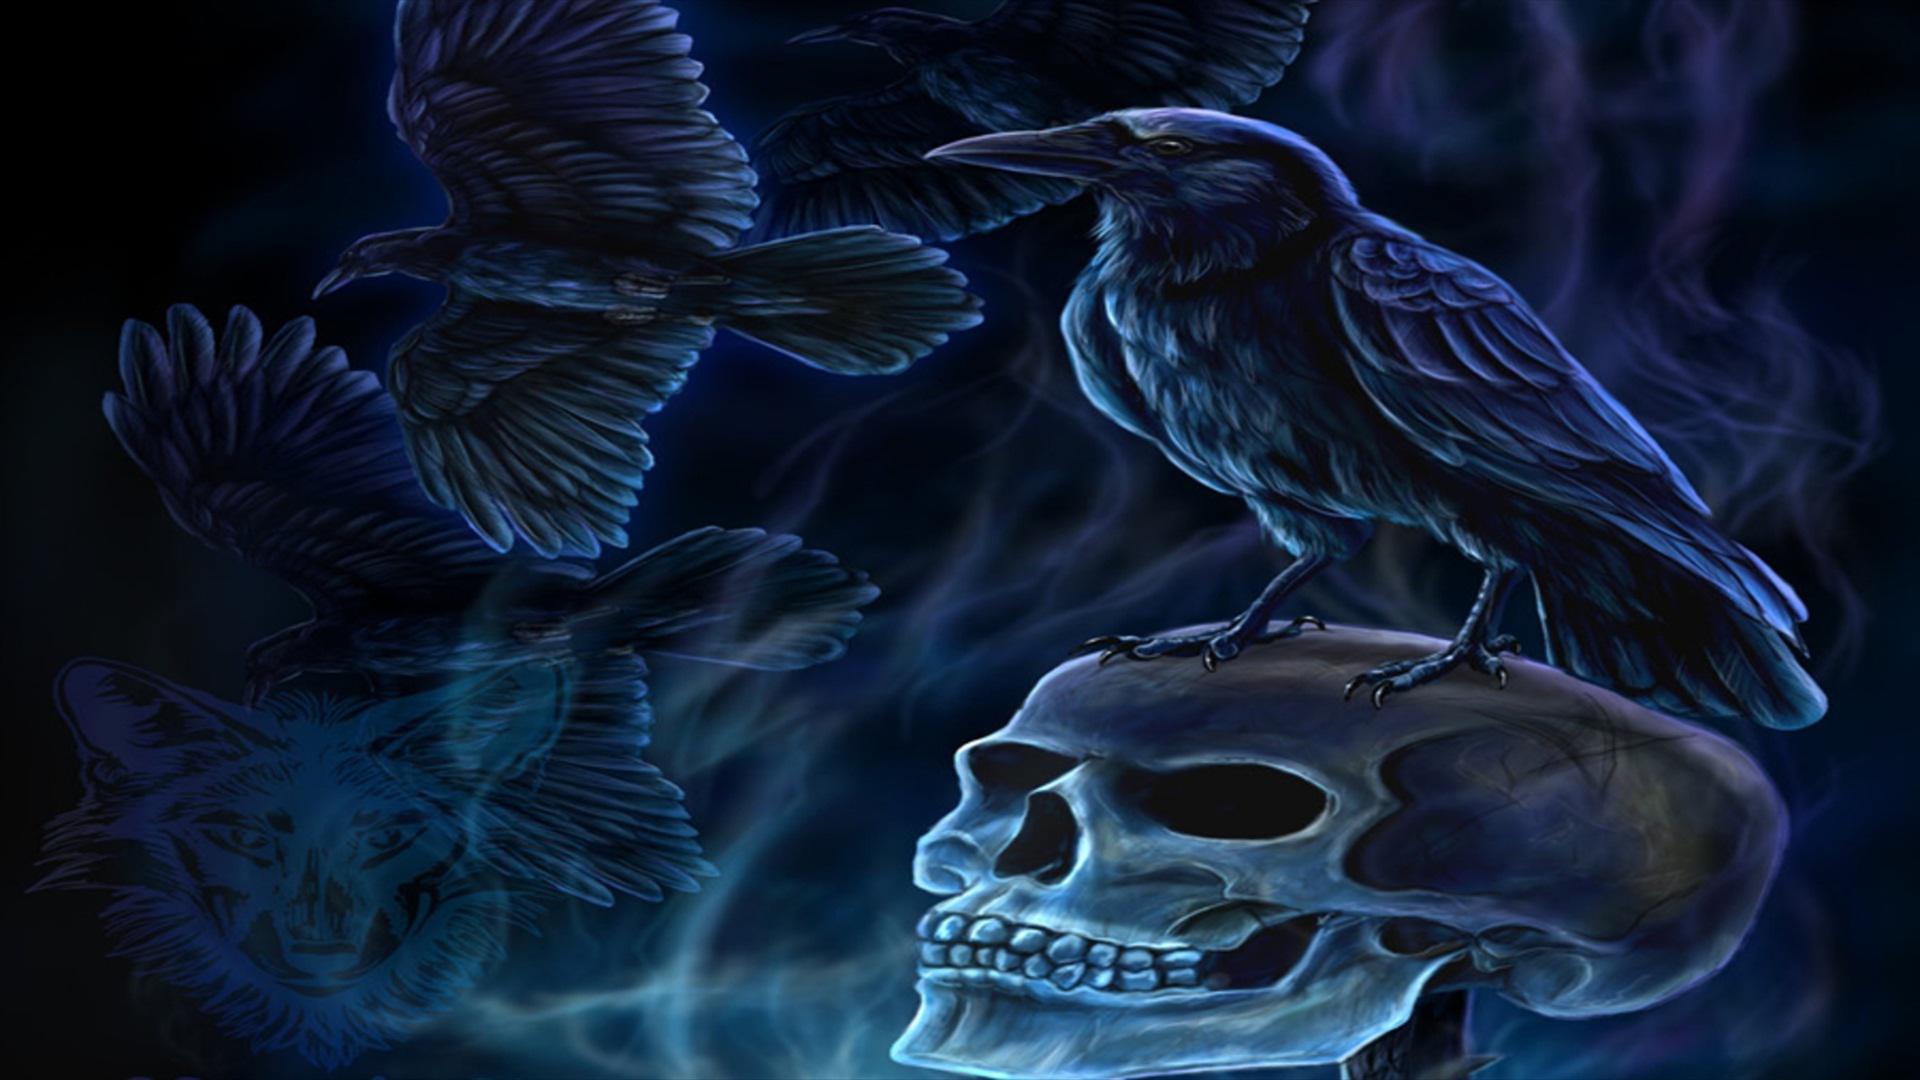 Blue raven - (#109960) - High Quality and Resolution Wallpapers on ...